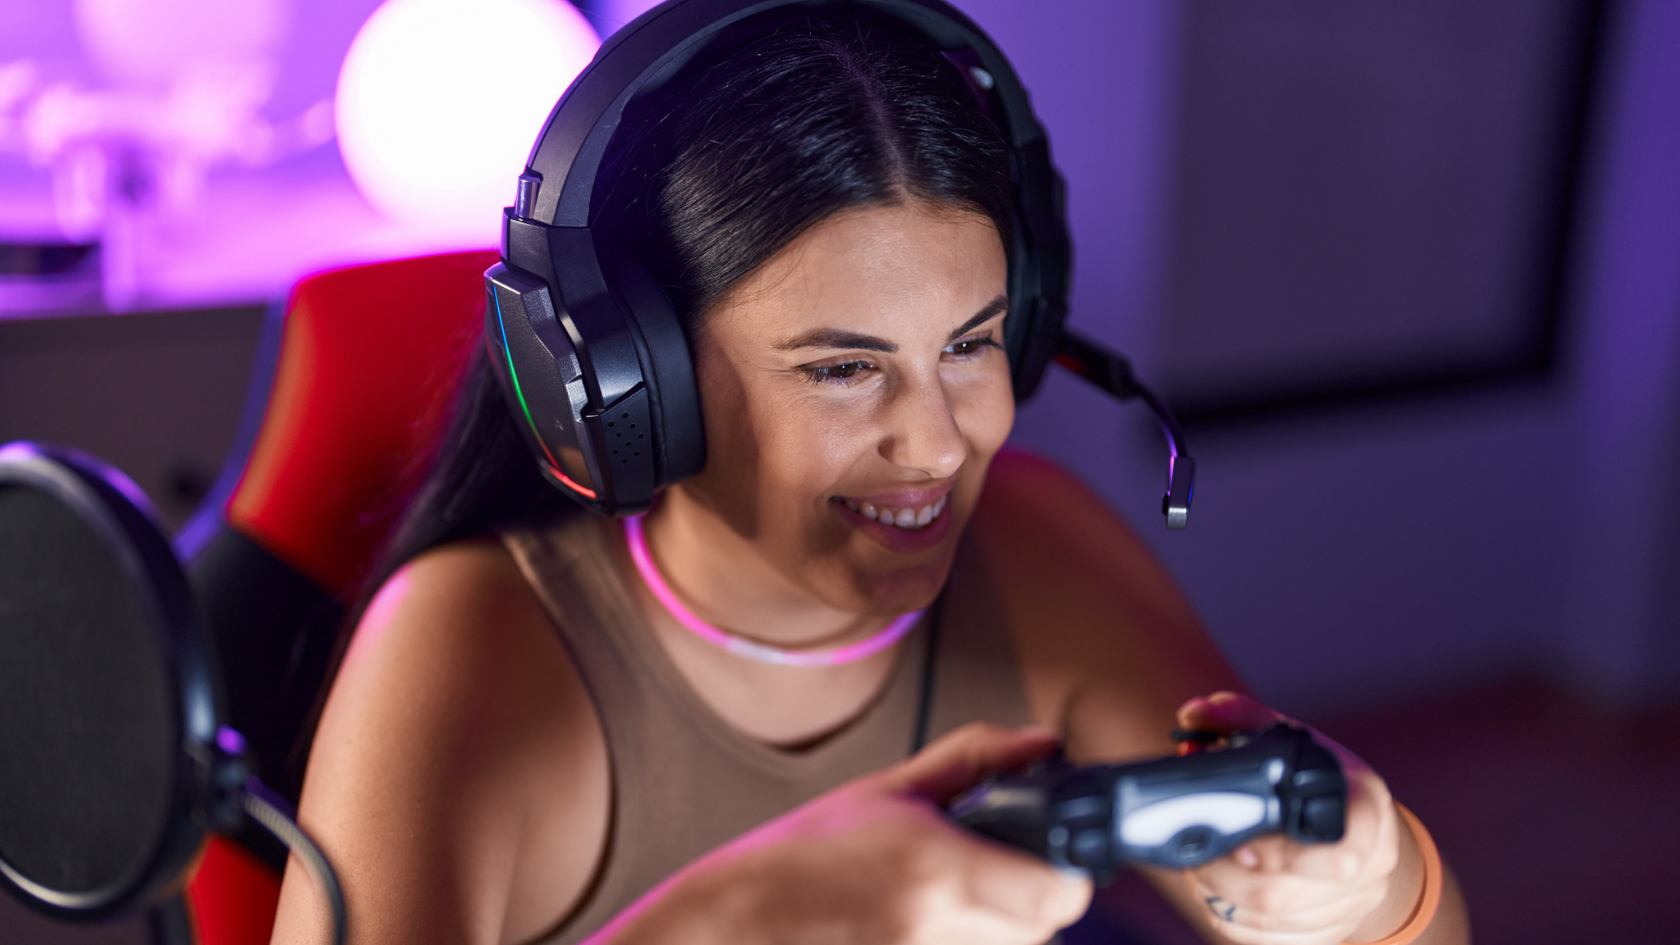 A woman wearing headphones is playing a video game.